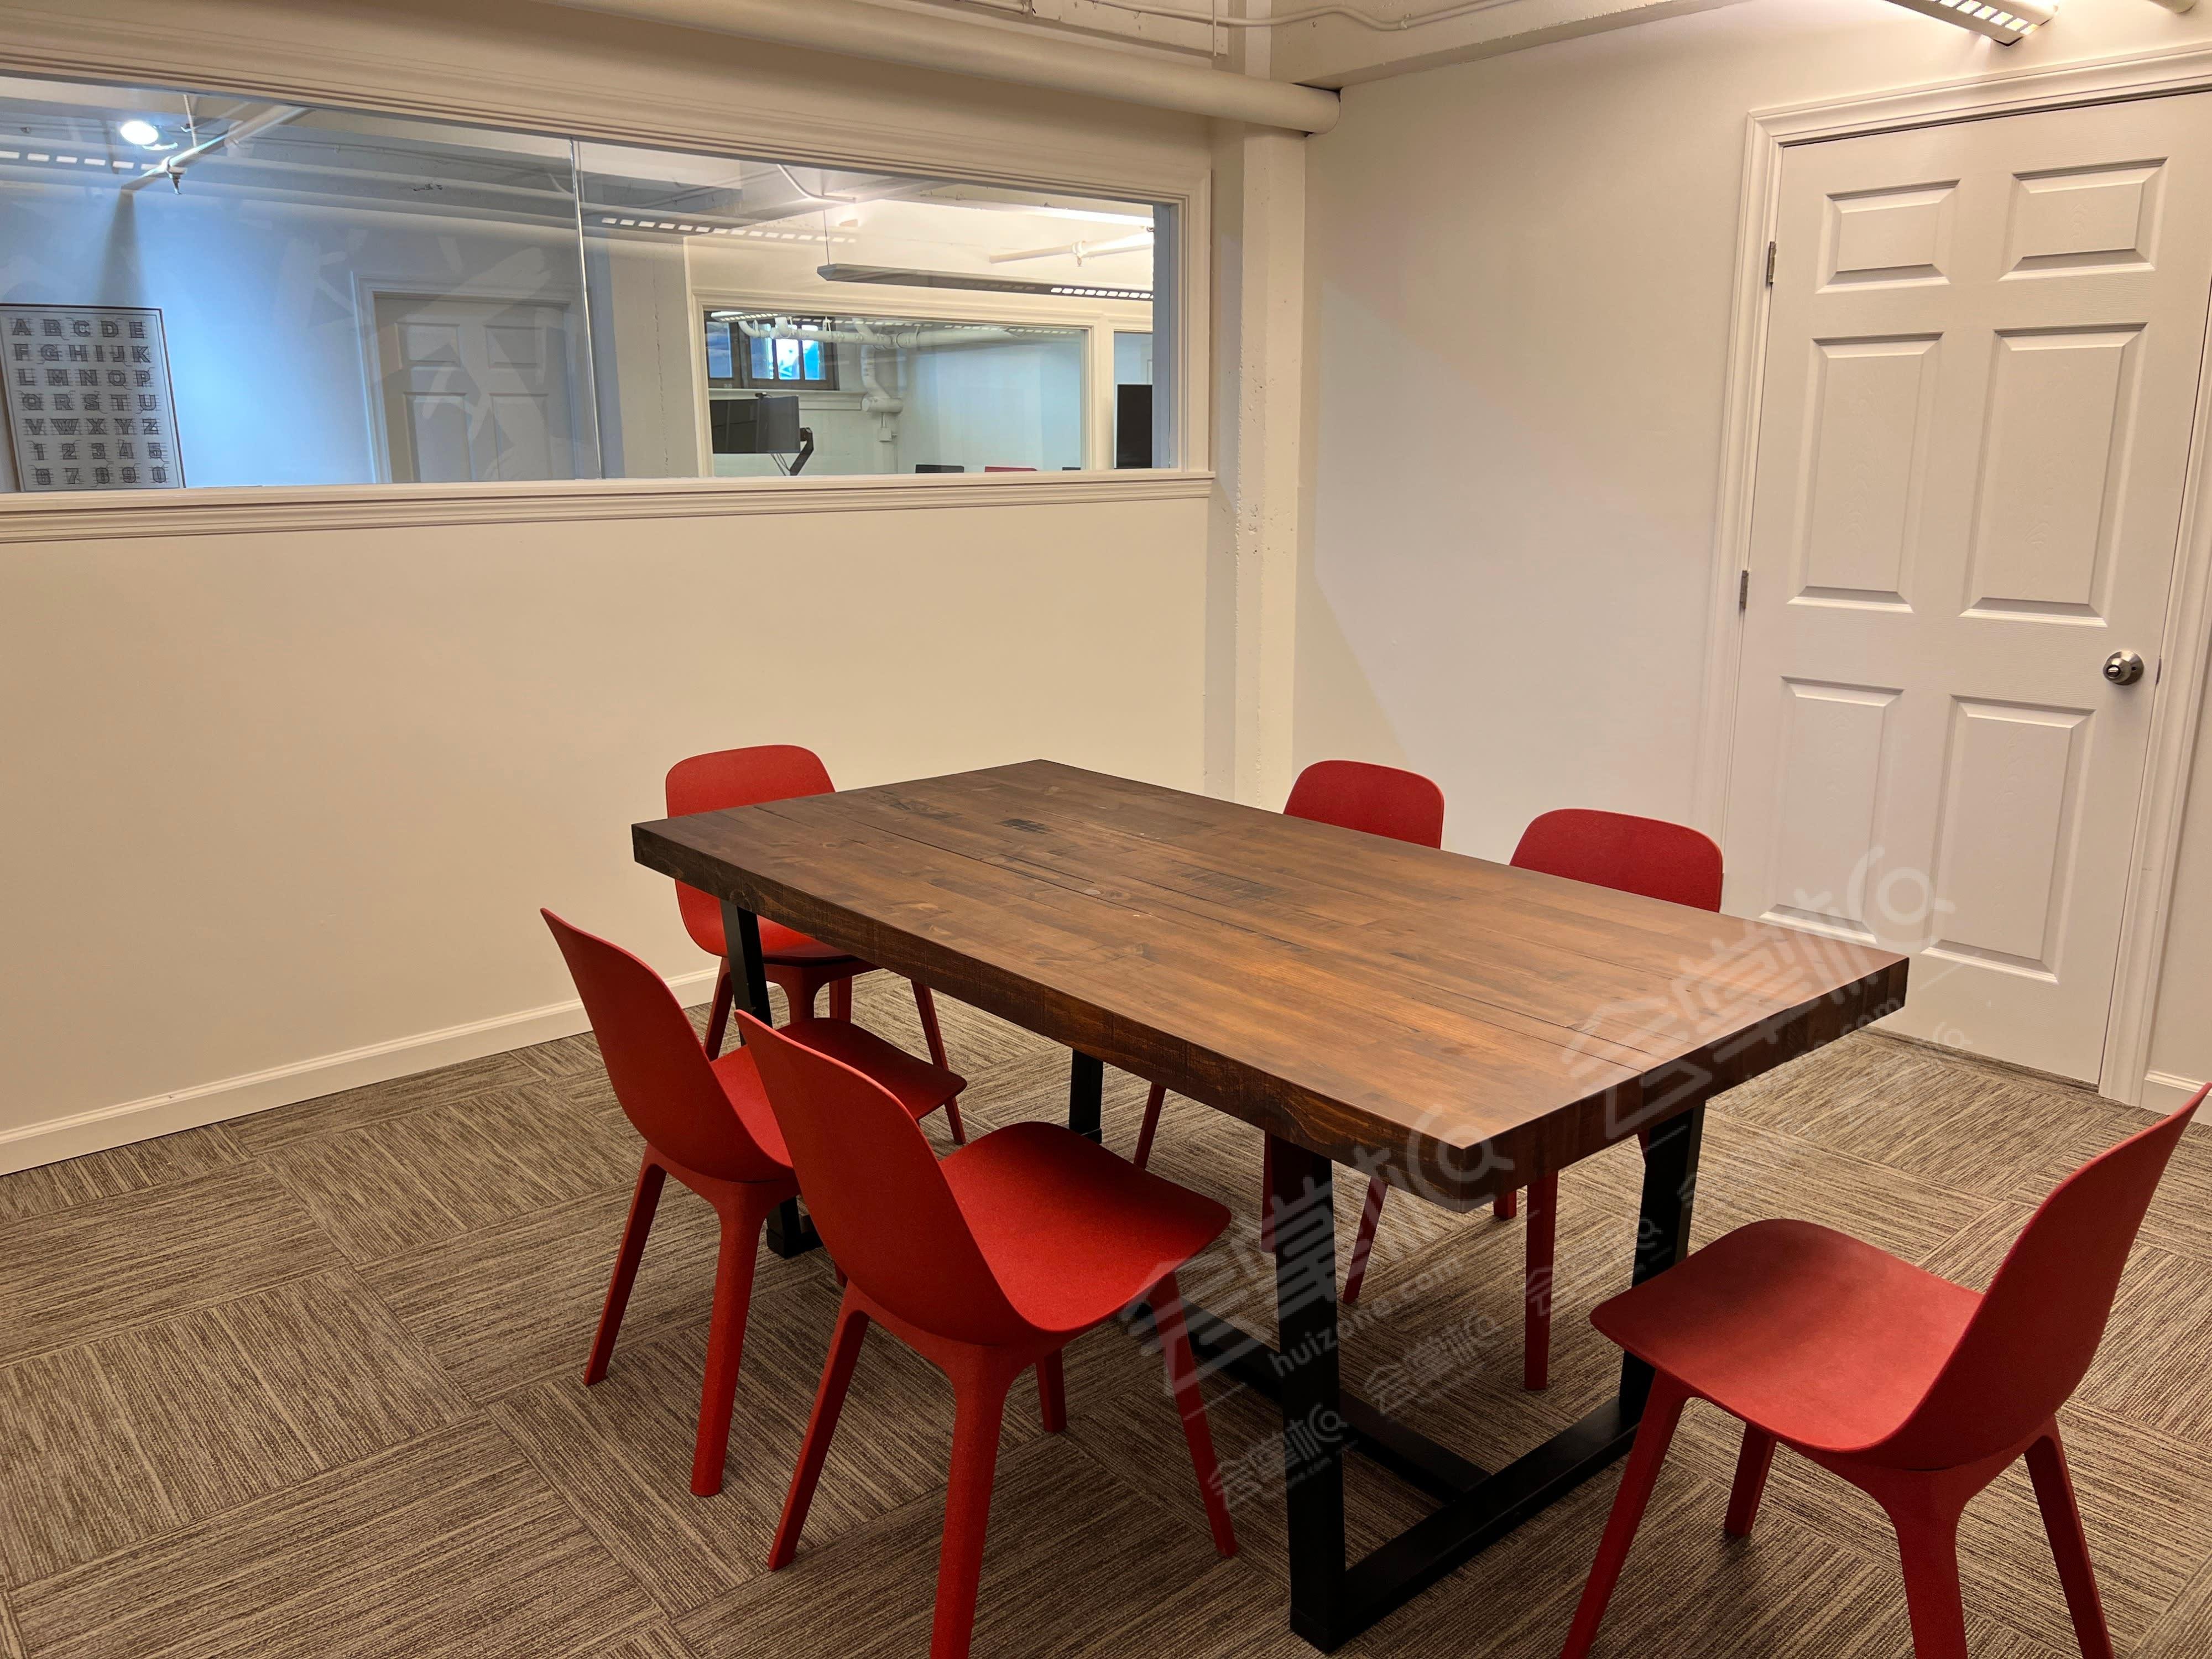 Modern Off-site Meeting & Conference Space Office